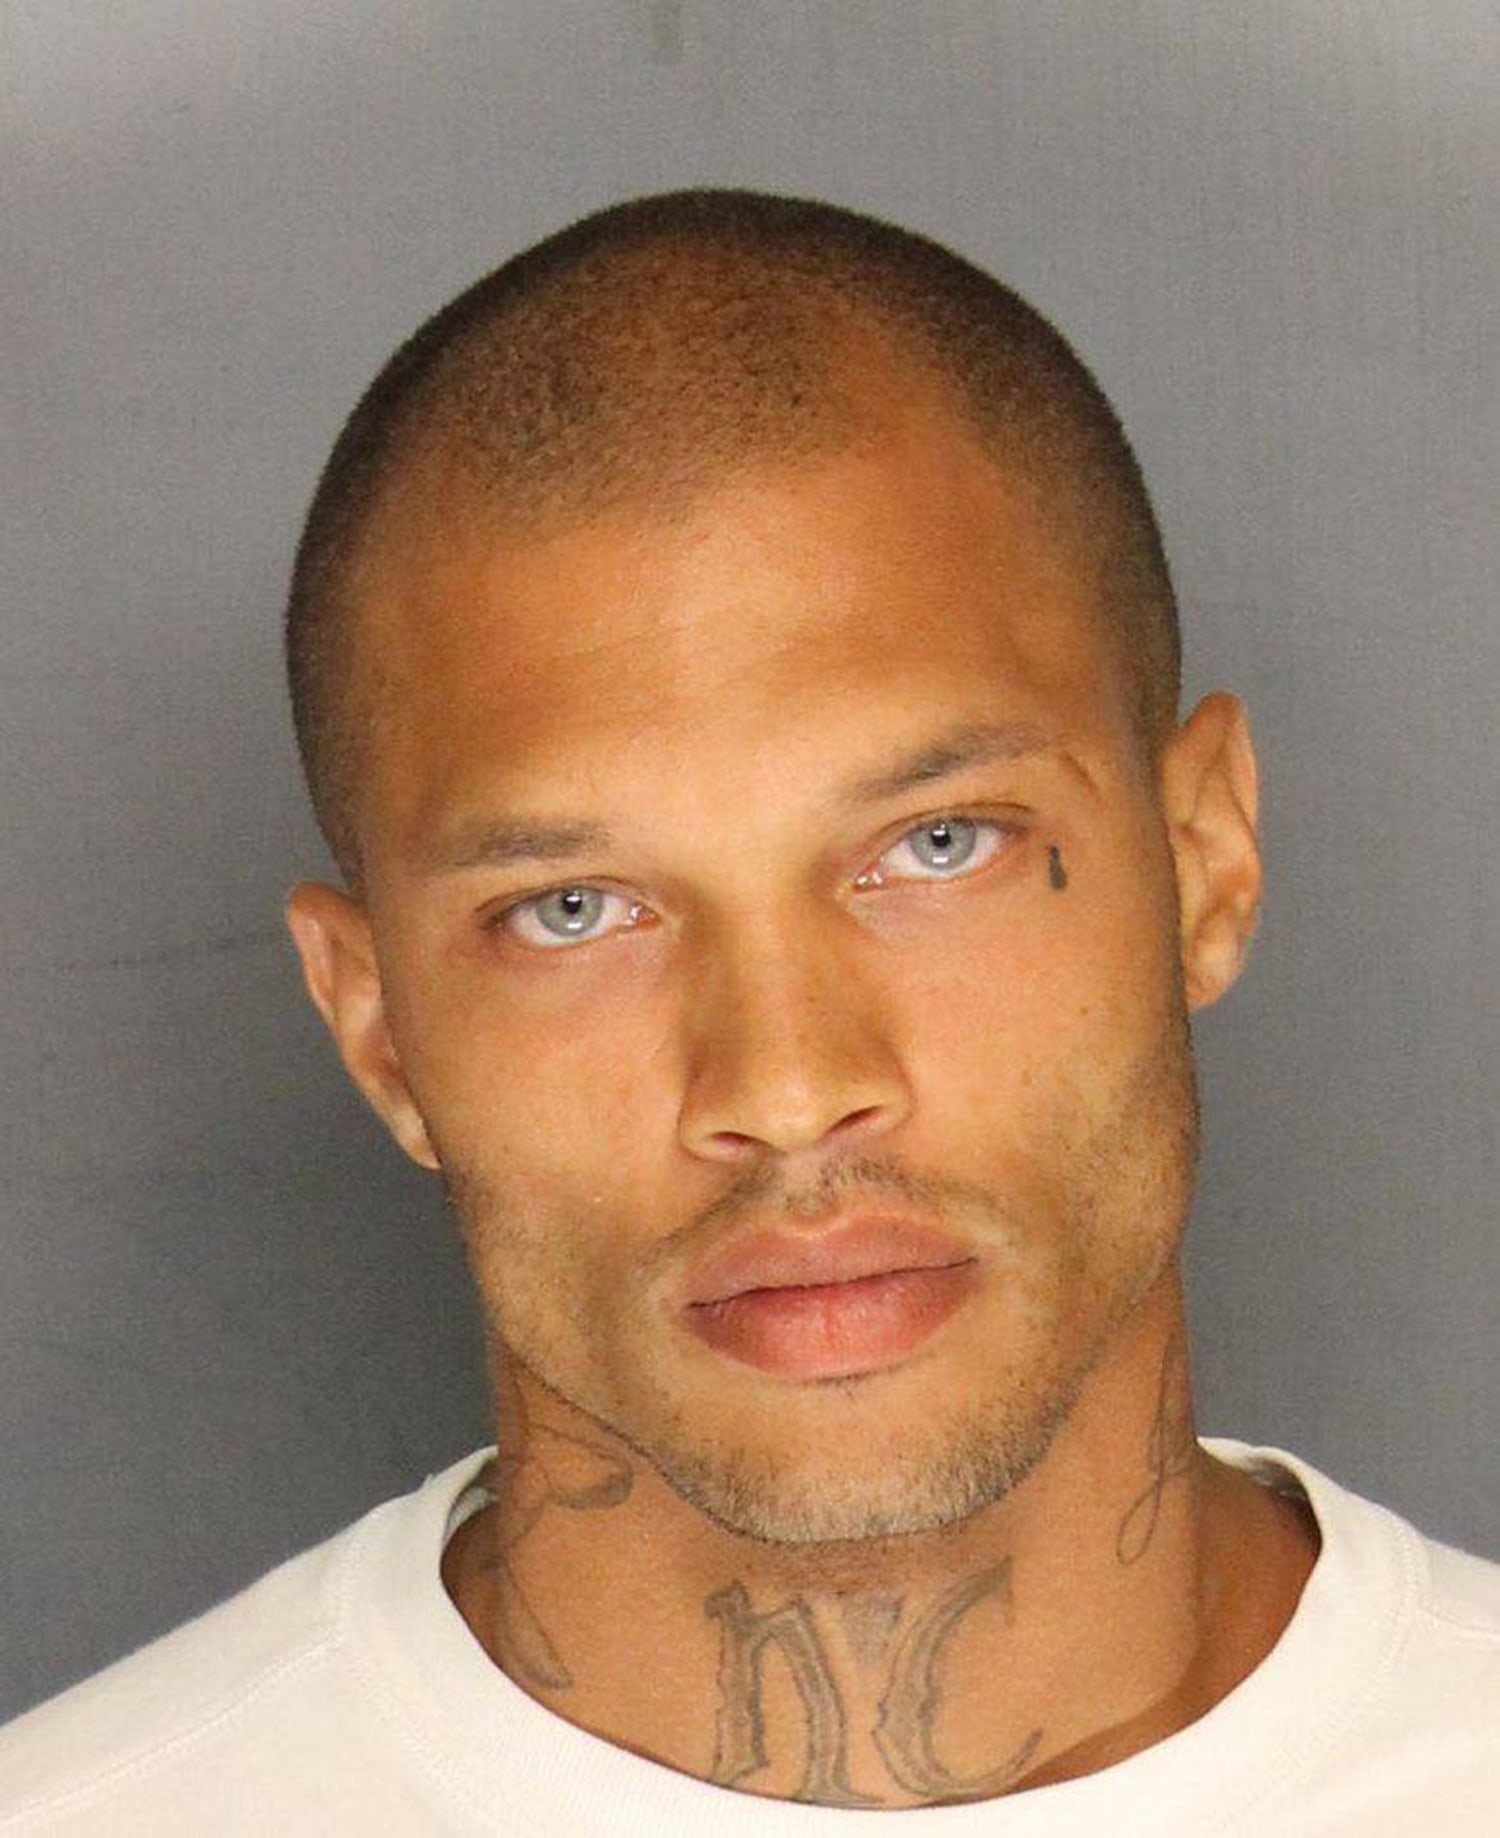 Hot Felon Jeremy Meeks and His Shirtless Body Are On the Runway Again  Jeremy  Meeks Milan Fashion Week